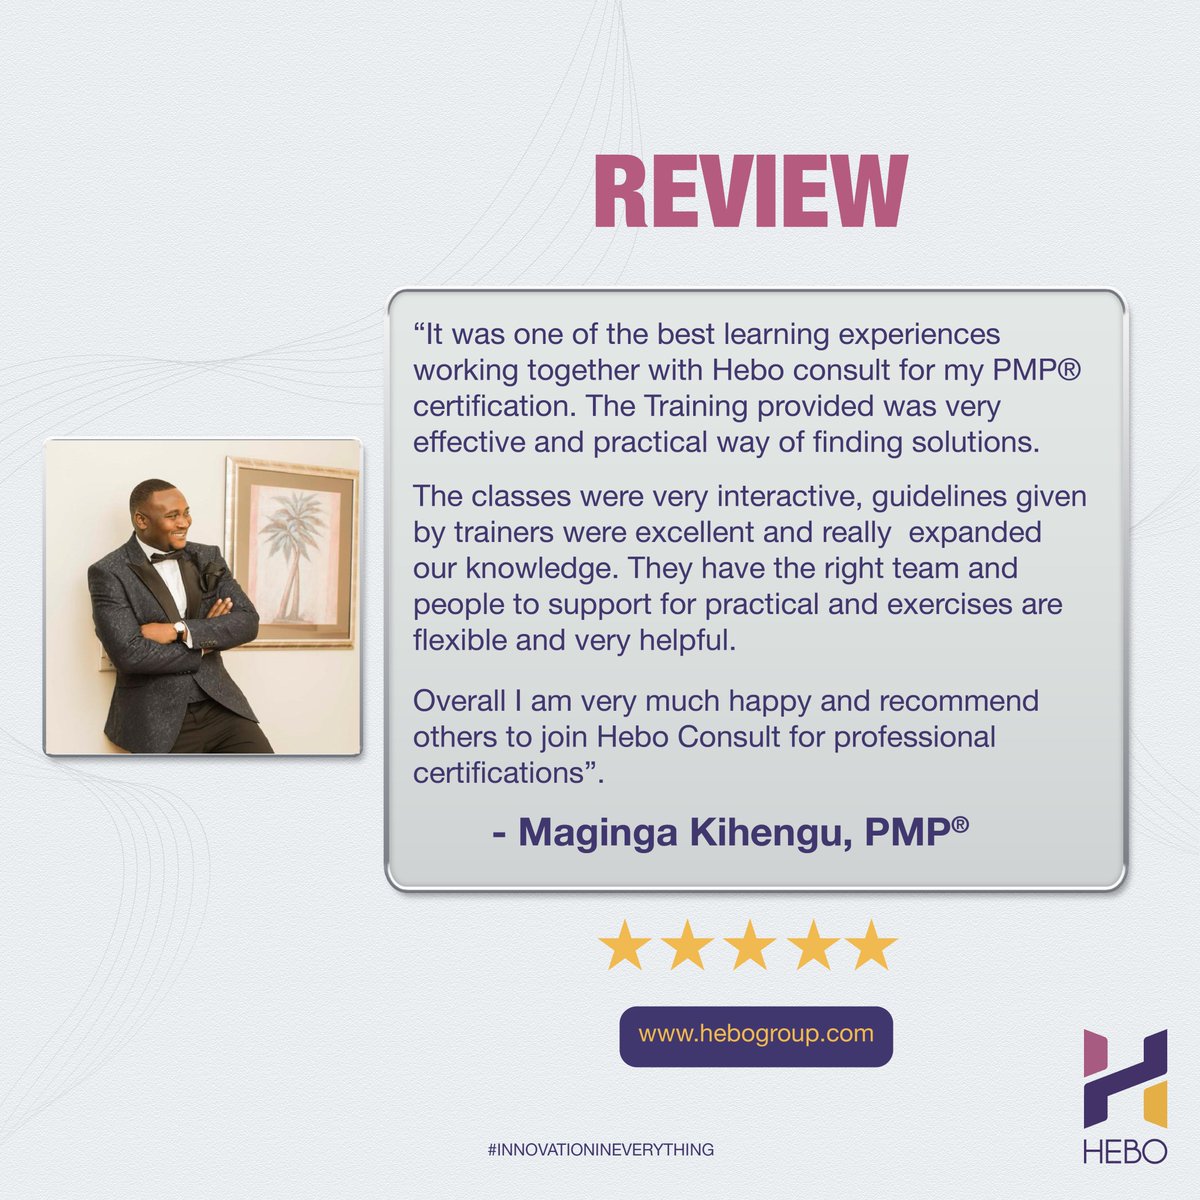 #TuesdayTestimony Thank you for the feedback, Maginga Kihengu, PMP®. We are glad that you had a wonderful experience in our PMP Master class.
#PMPclub #ProjectManagementProfessionals #EastAfrica #PMI #HEBO